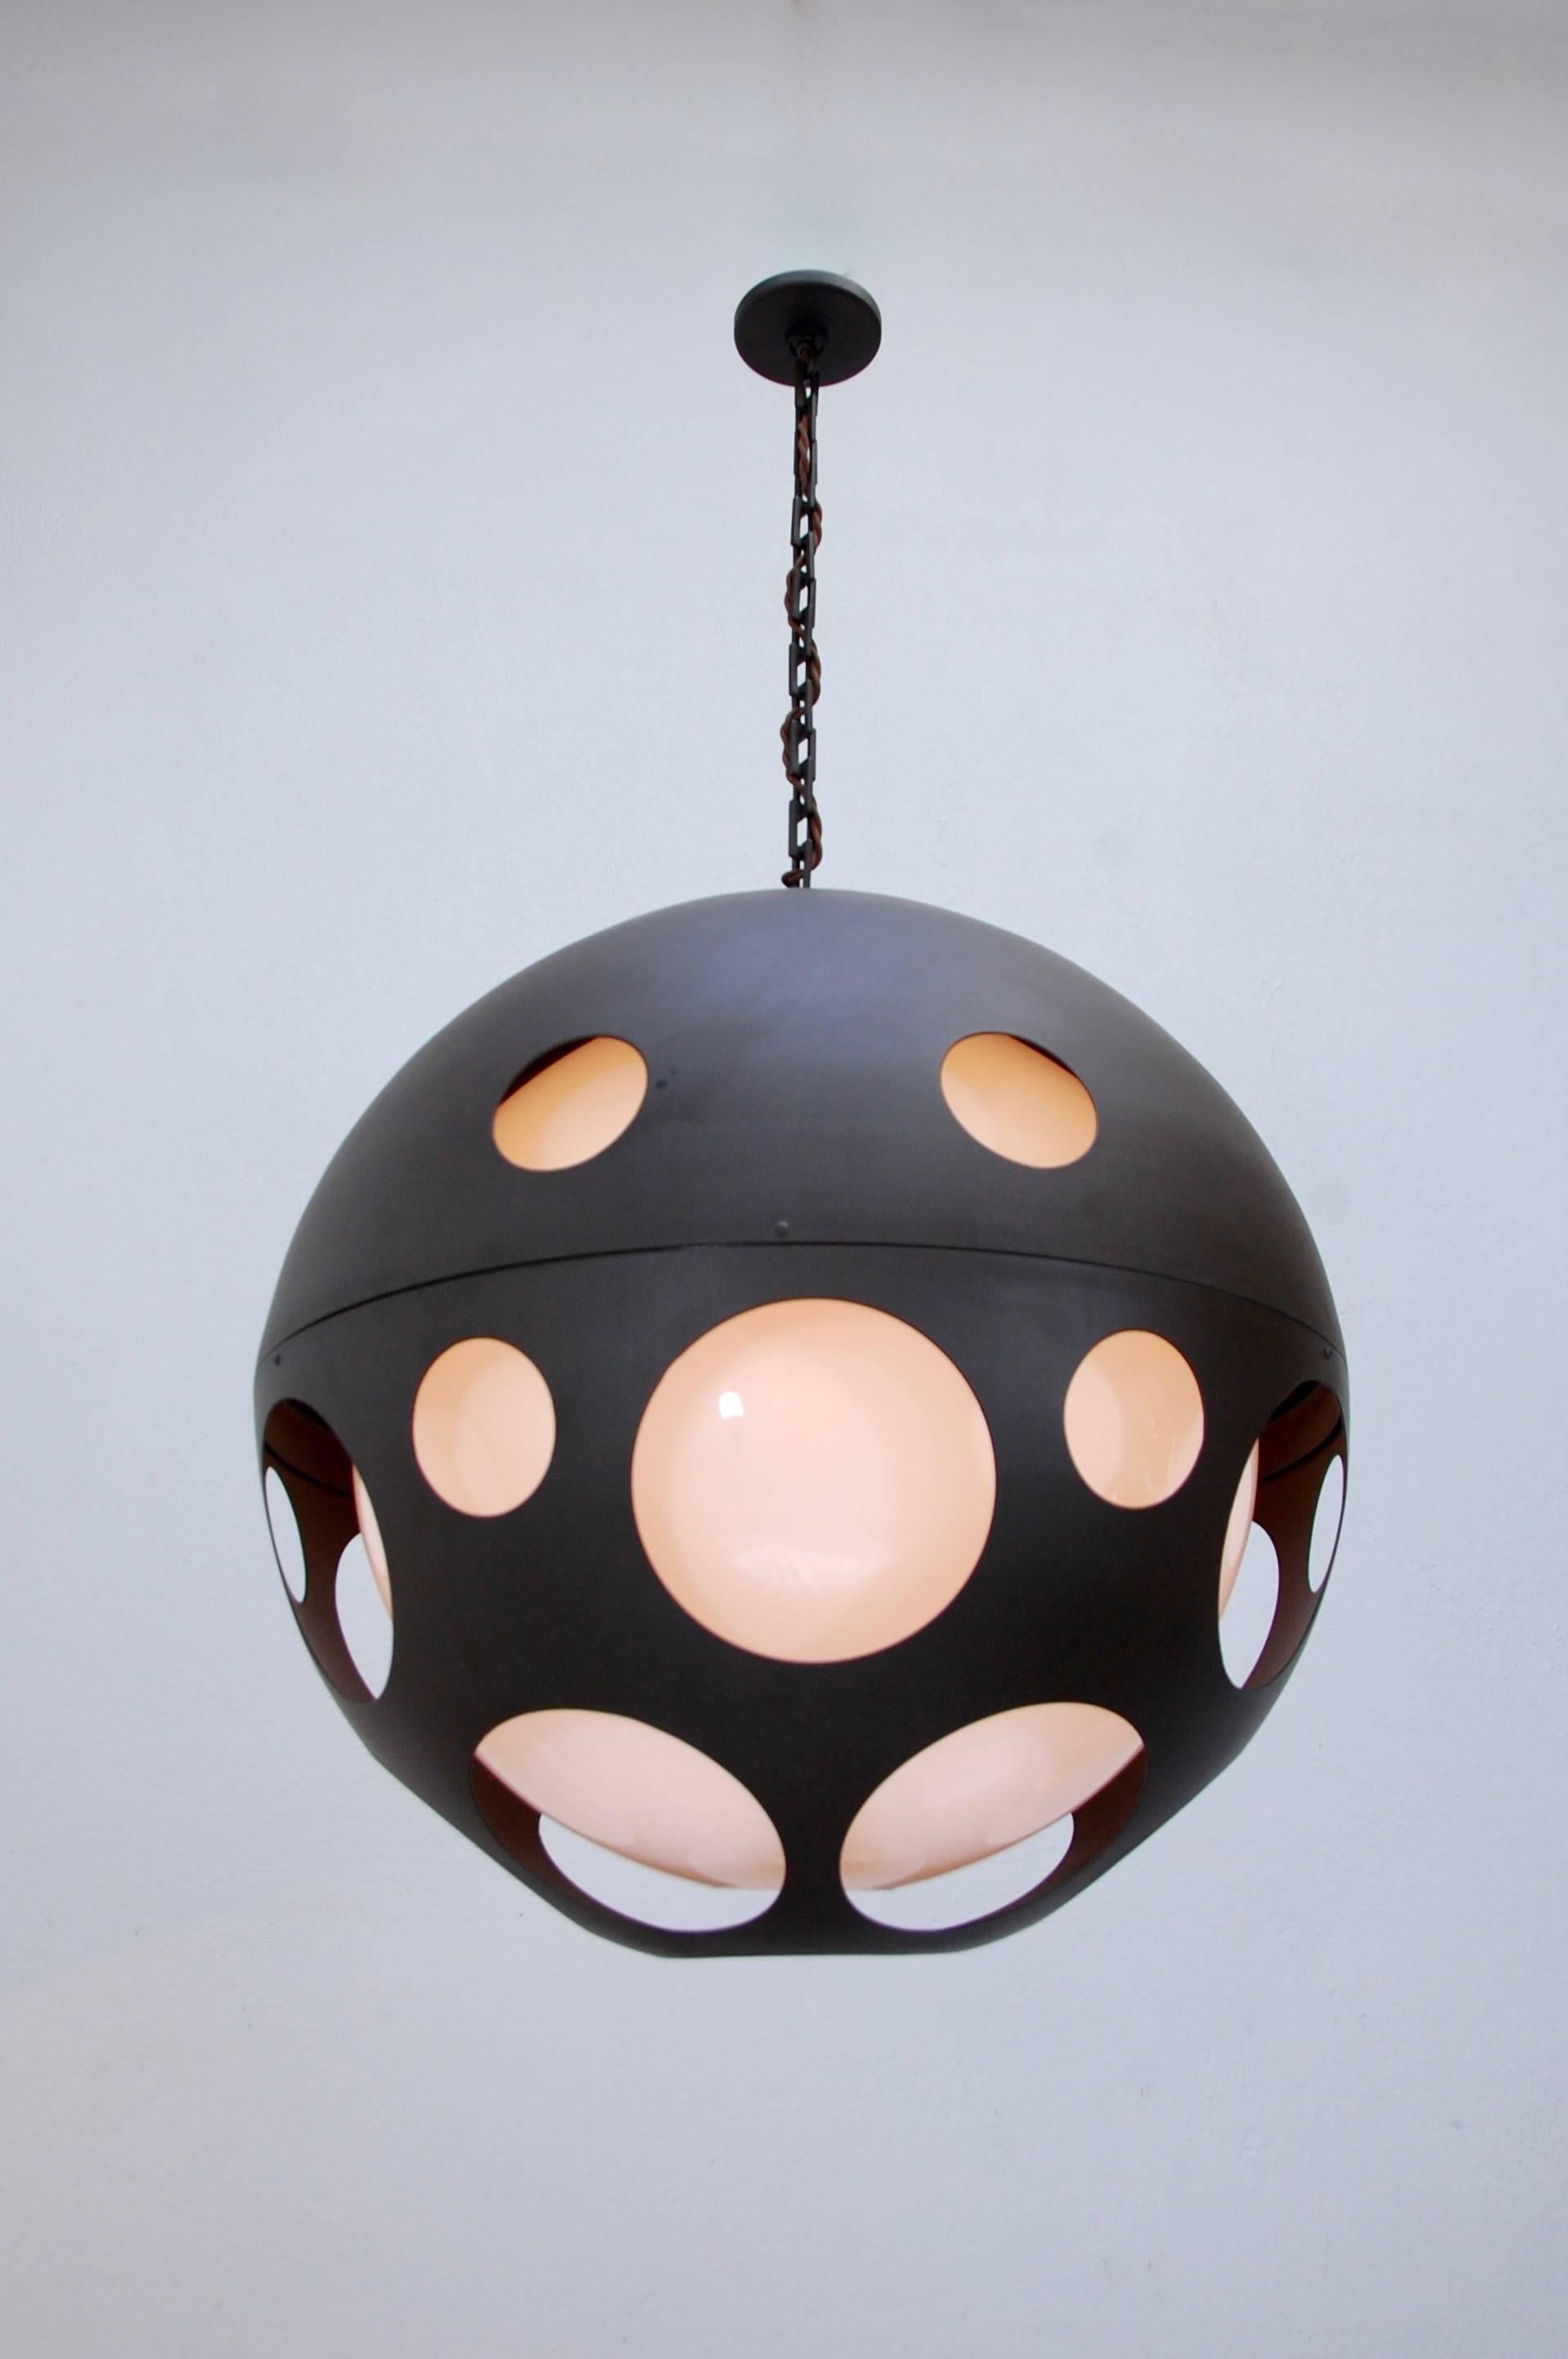 Large perforated globe pendant from circa early 2000s in powder coated aluminium and acrylic. Overall drop adjustable upon request.

Measures: Diameter 24”
Current overall drop 44”
Acrylic internal globe 18”.
 